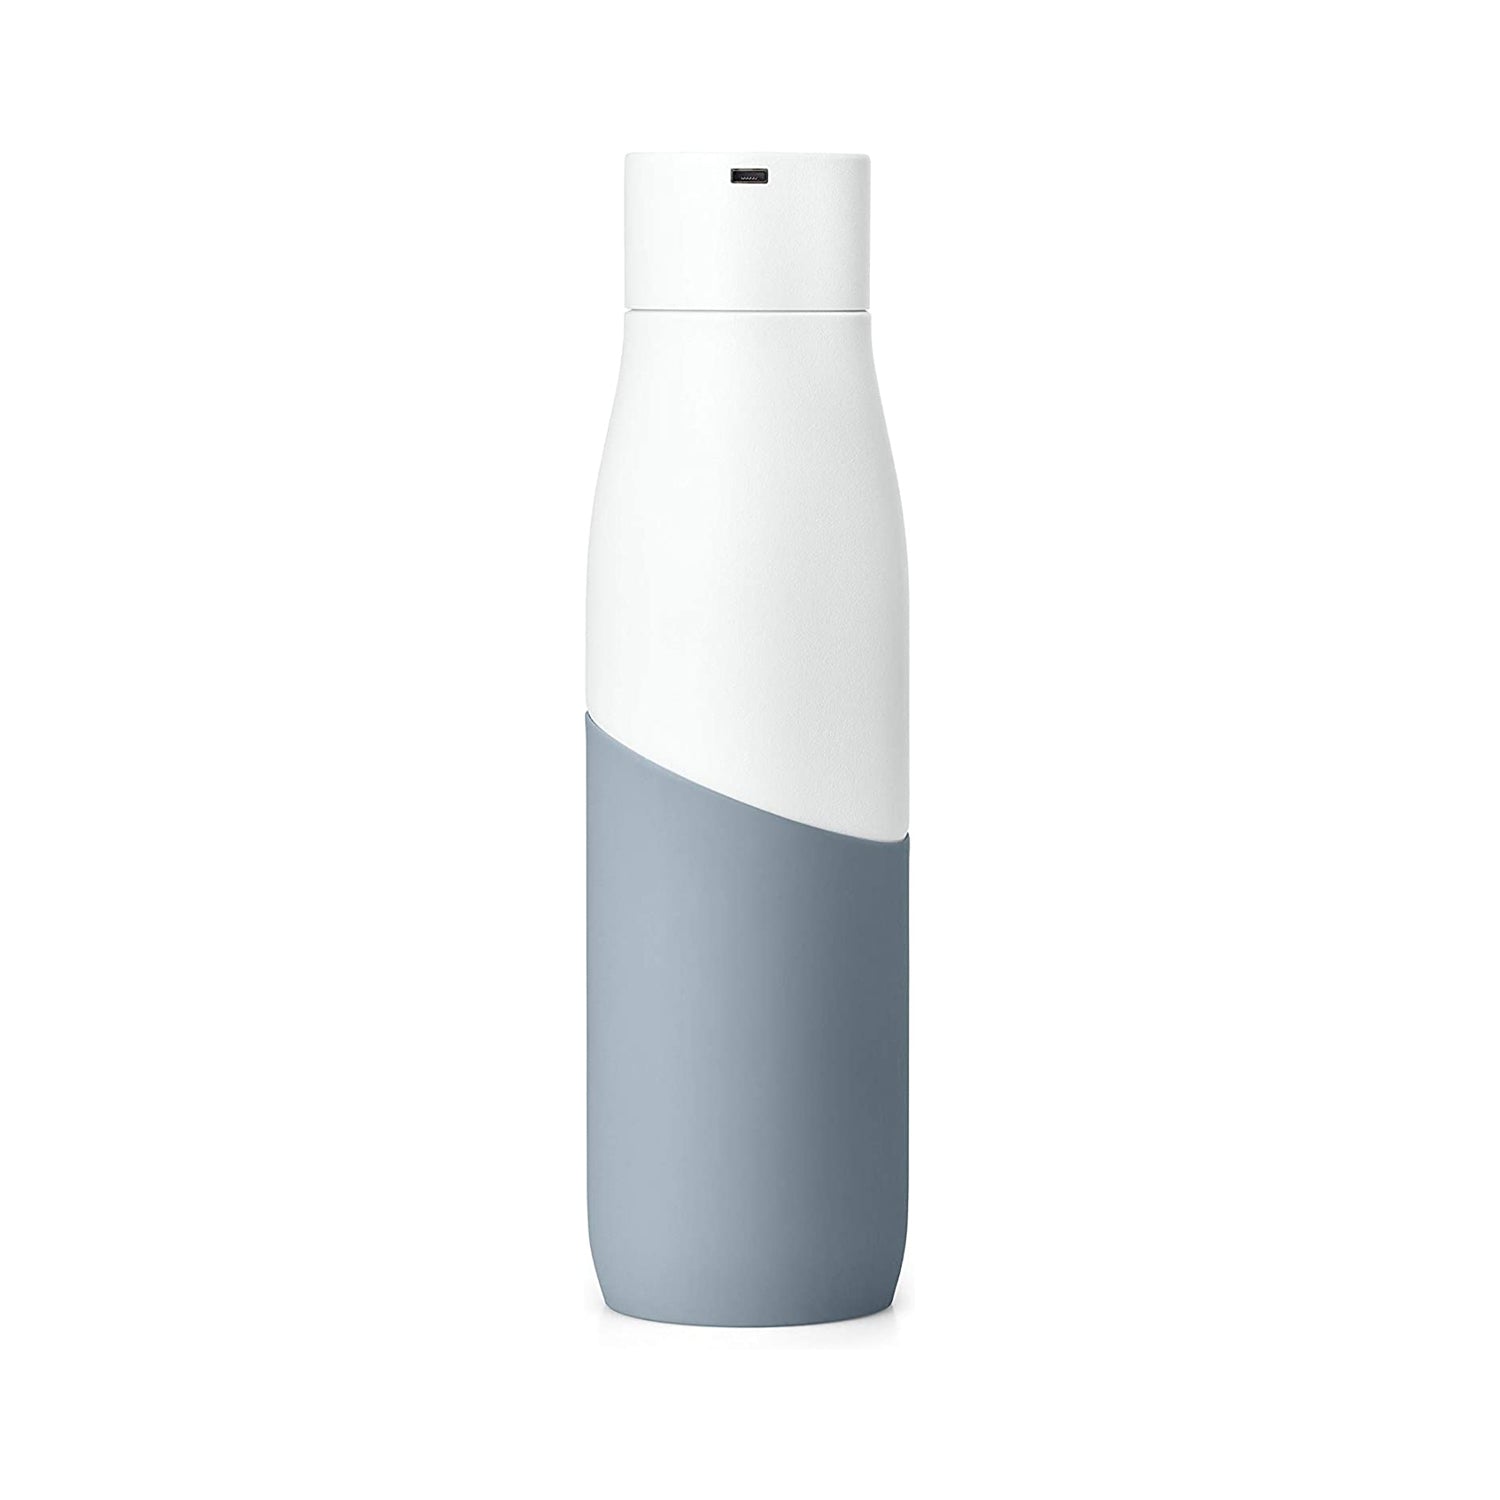 LARQ Bottle Movement PureVis Self-Cleaning, Non-Insulated Stainless Steel Water Bottle